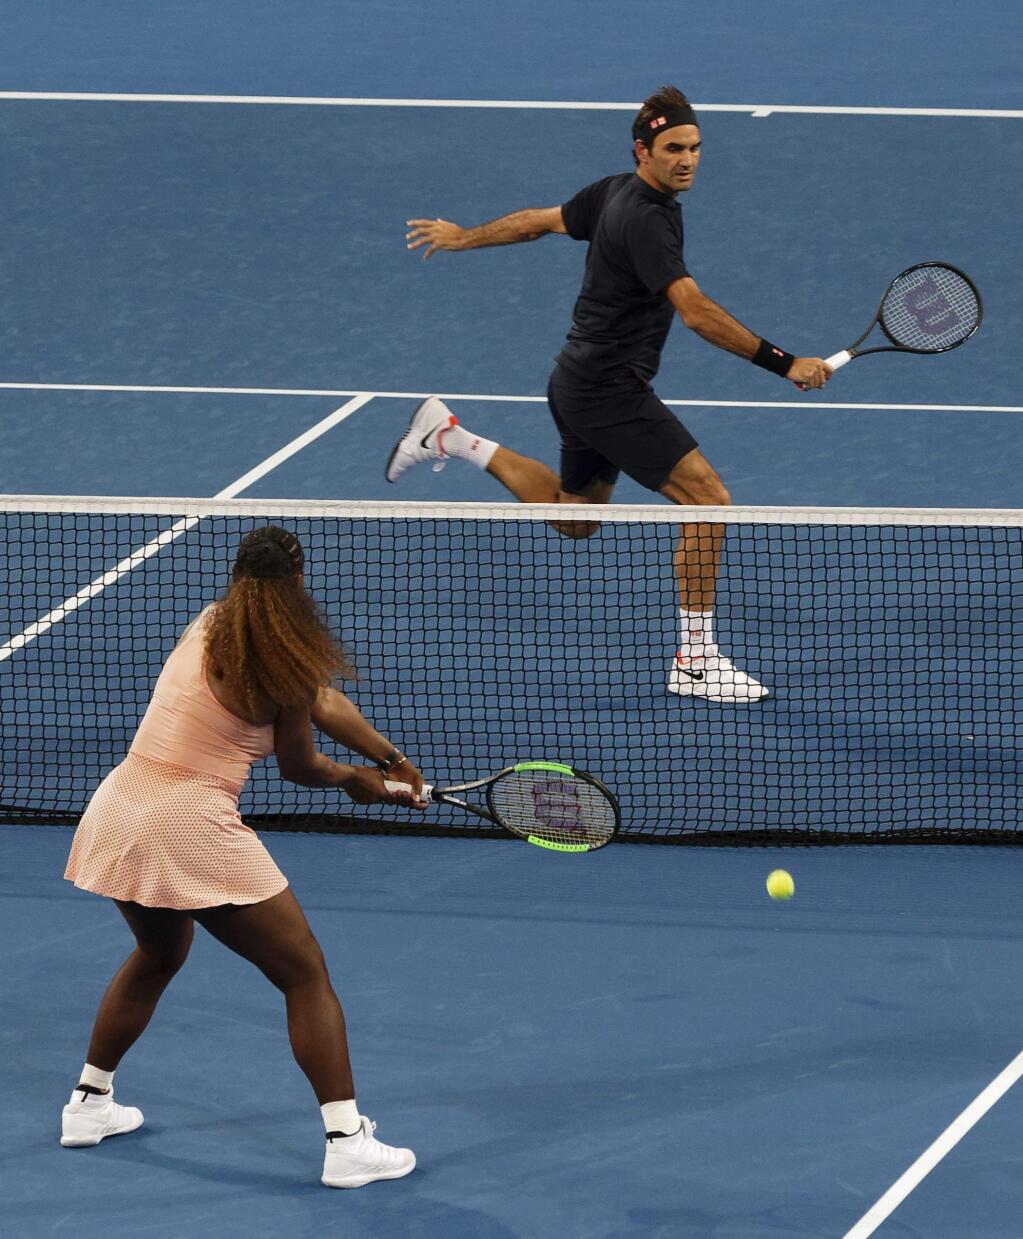 Roger Federer of Switzerland returns the ball to Serena Williams of the United States during their mixed doubles match at the Hopman Cup in Perth, Australia, Tuesday, 1, Jan. 2019. (AP Photo/Trevor Collens)